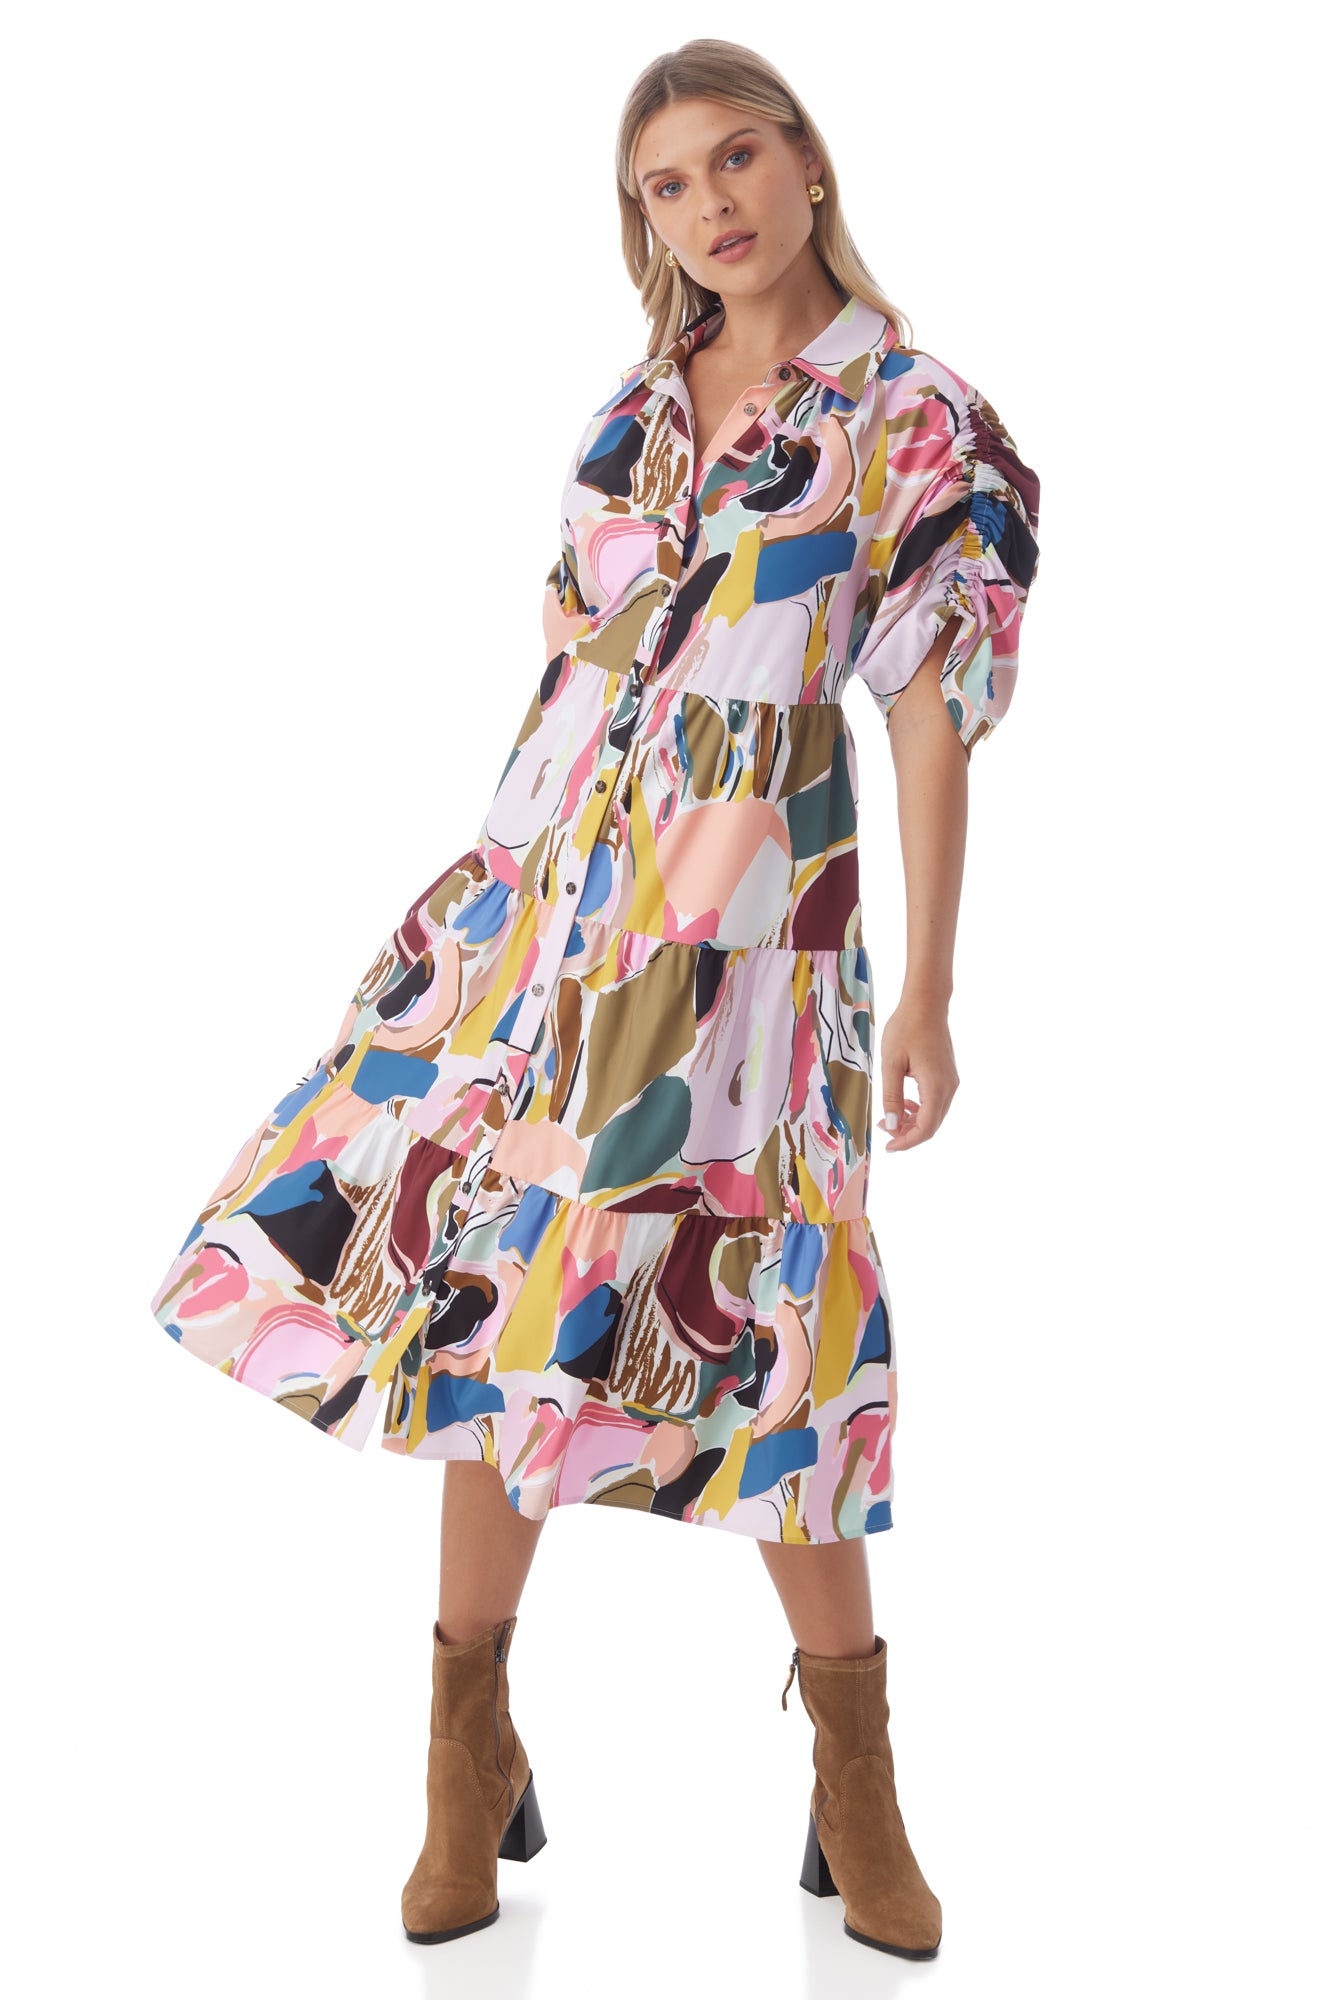 Whit Dress in Abstract Expression | CROSBY by Mollie Burch